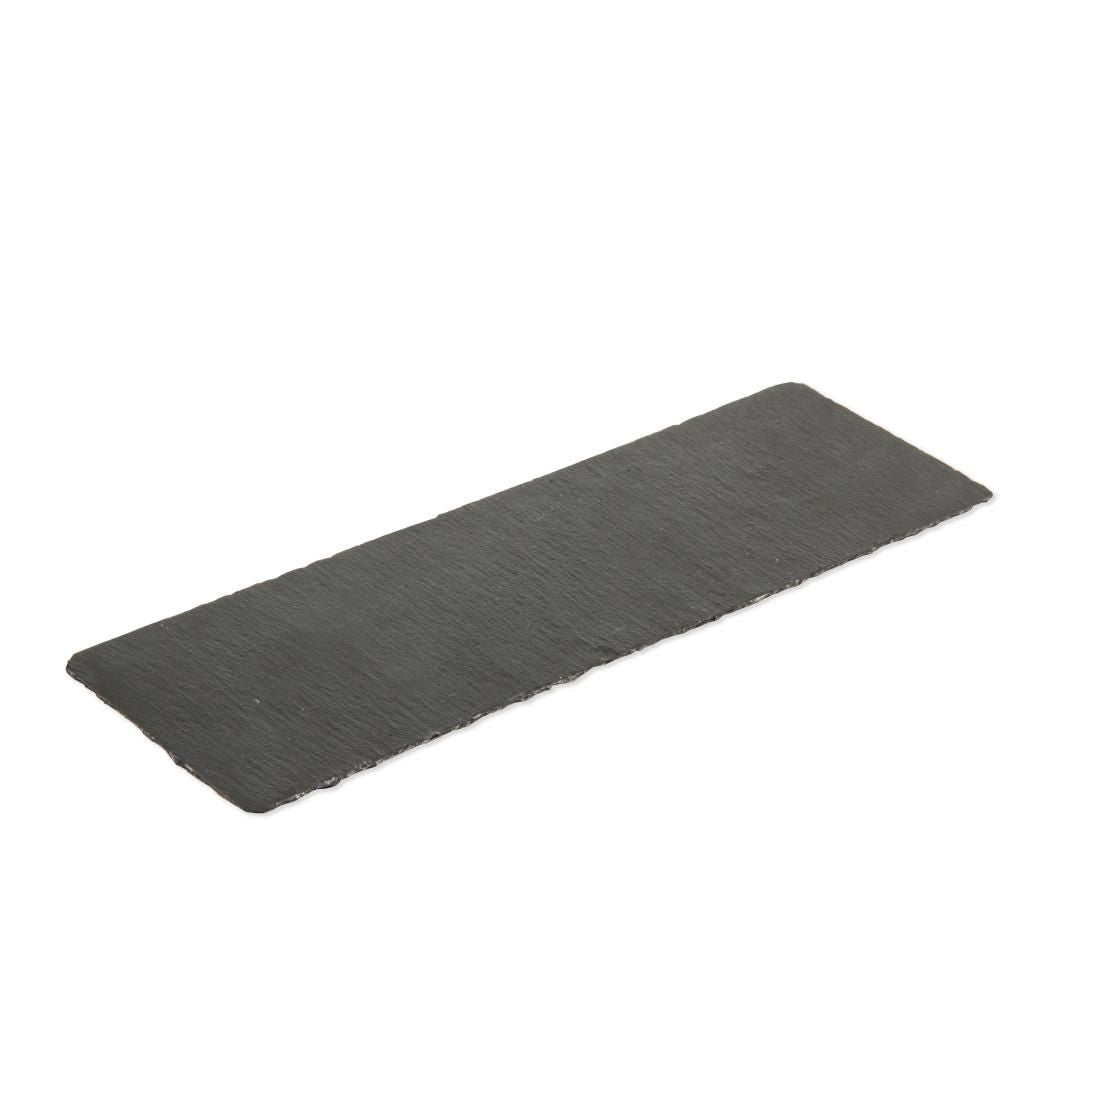 CK408 Olympia Natural Slate Rectangular Display Trays 300mm (Pack of 4)